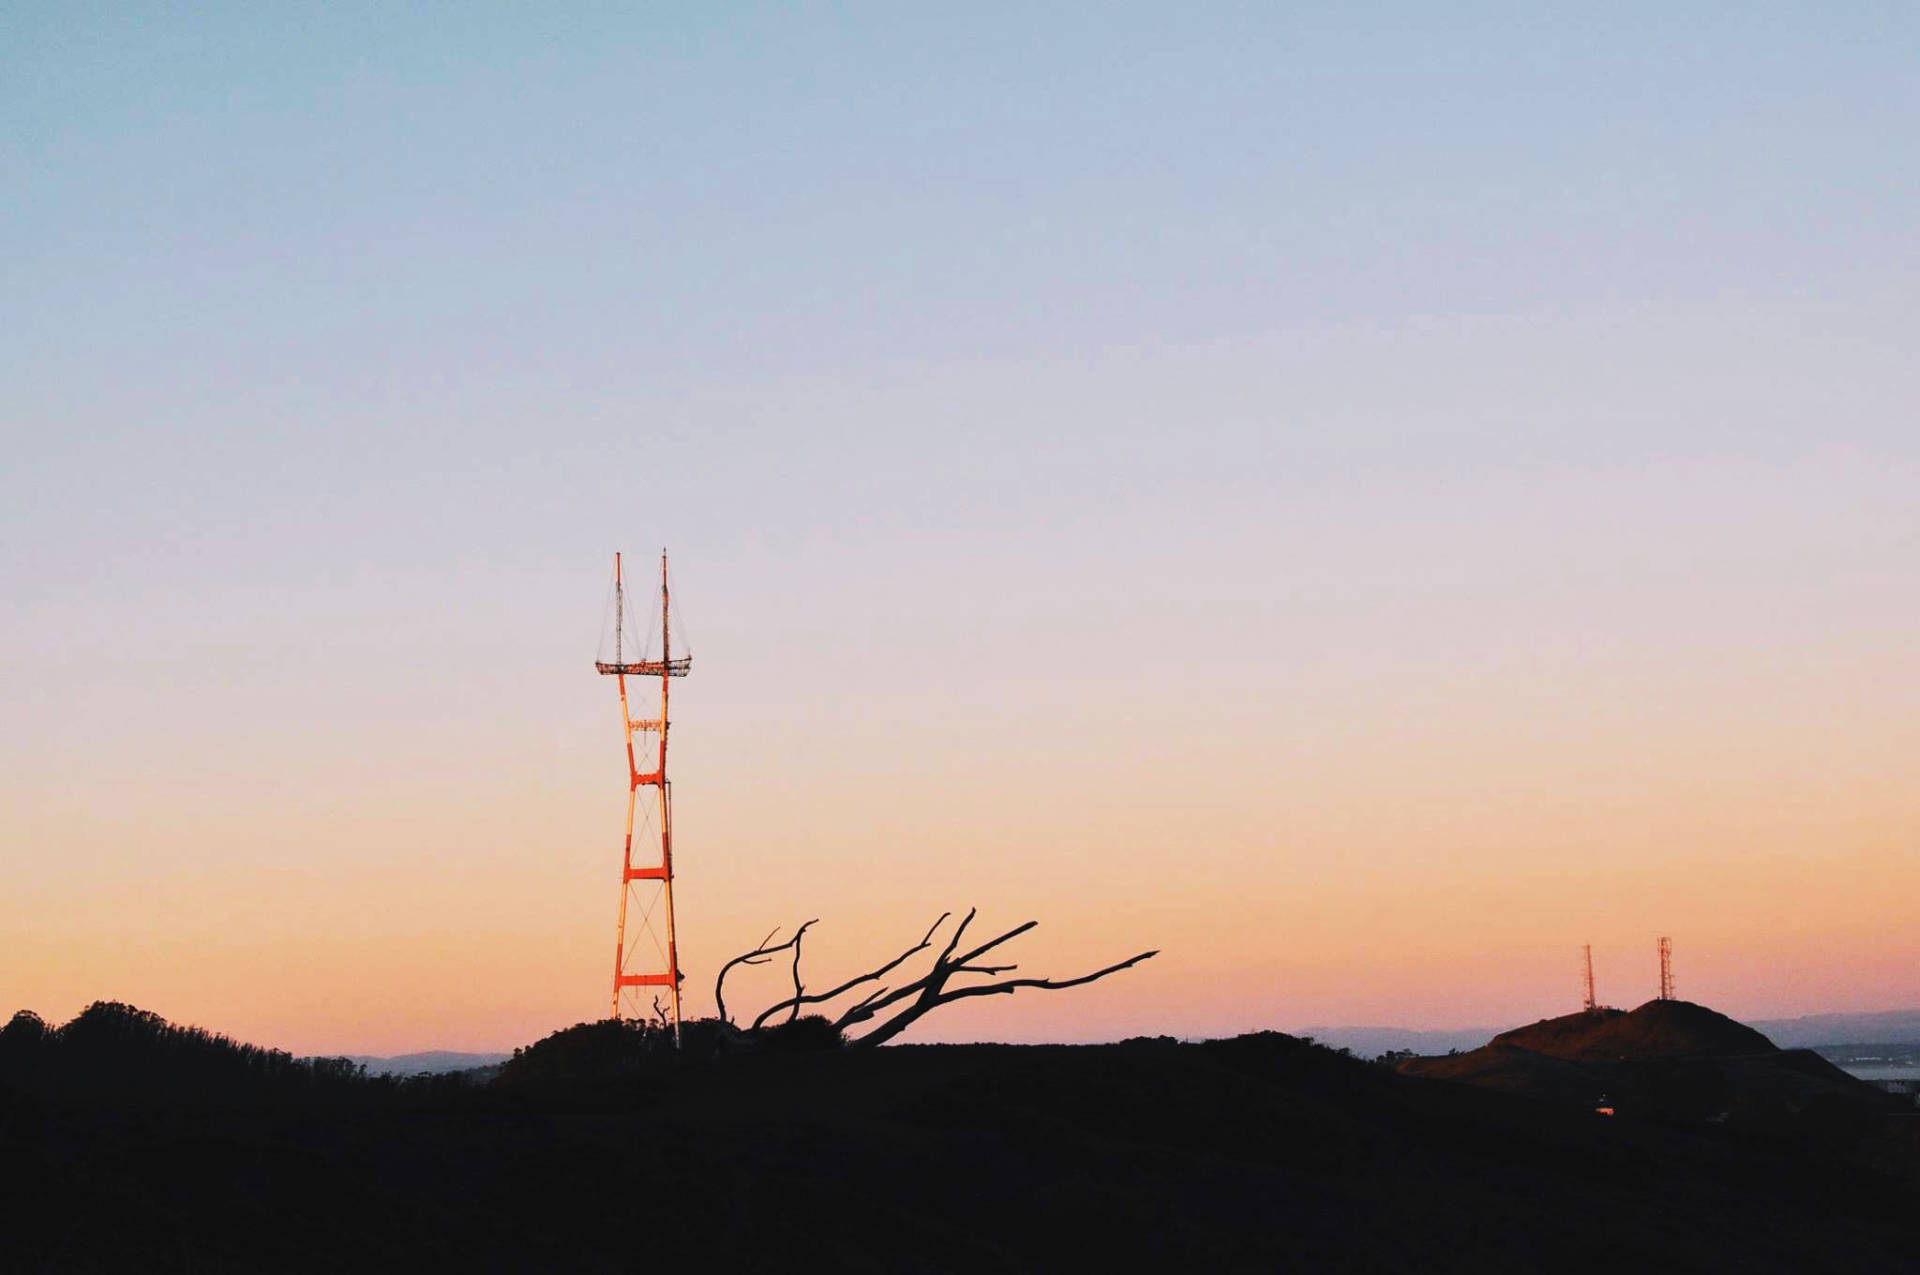 A view of San Francisco's Sutro Tower in the early morning light Lauren Hanussak 